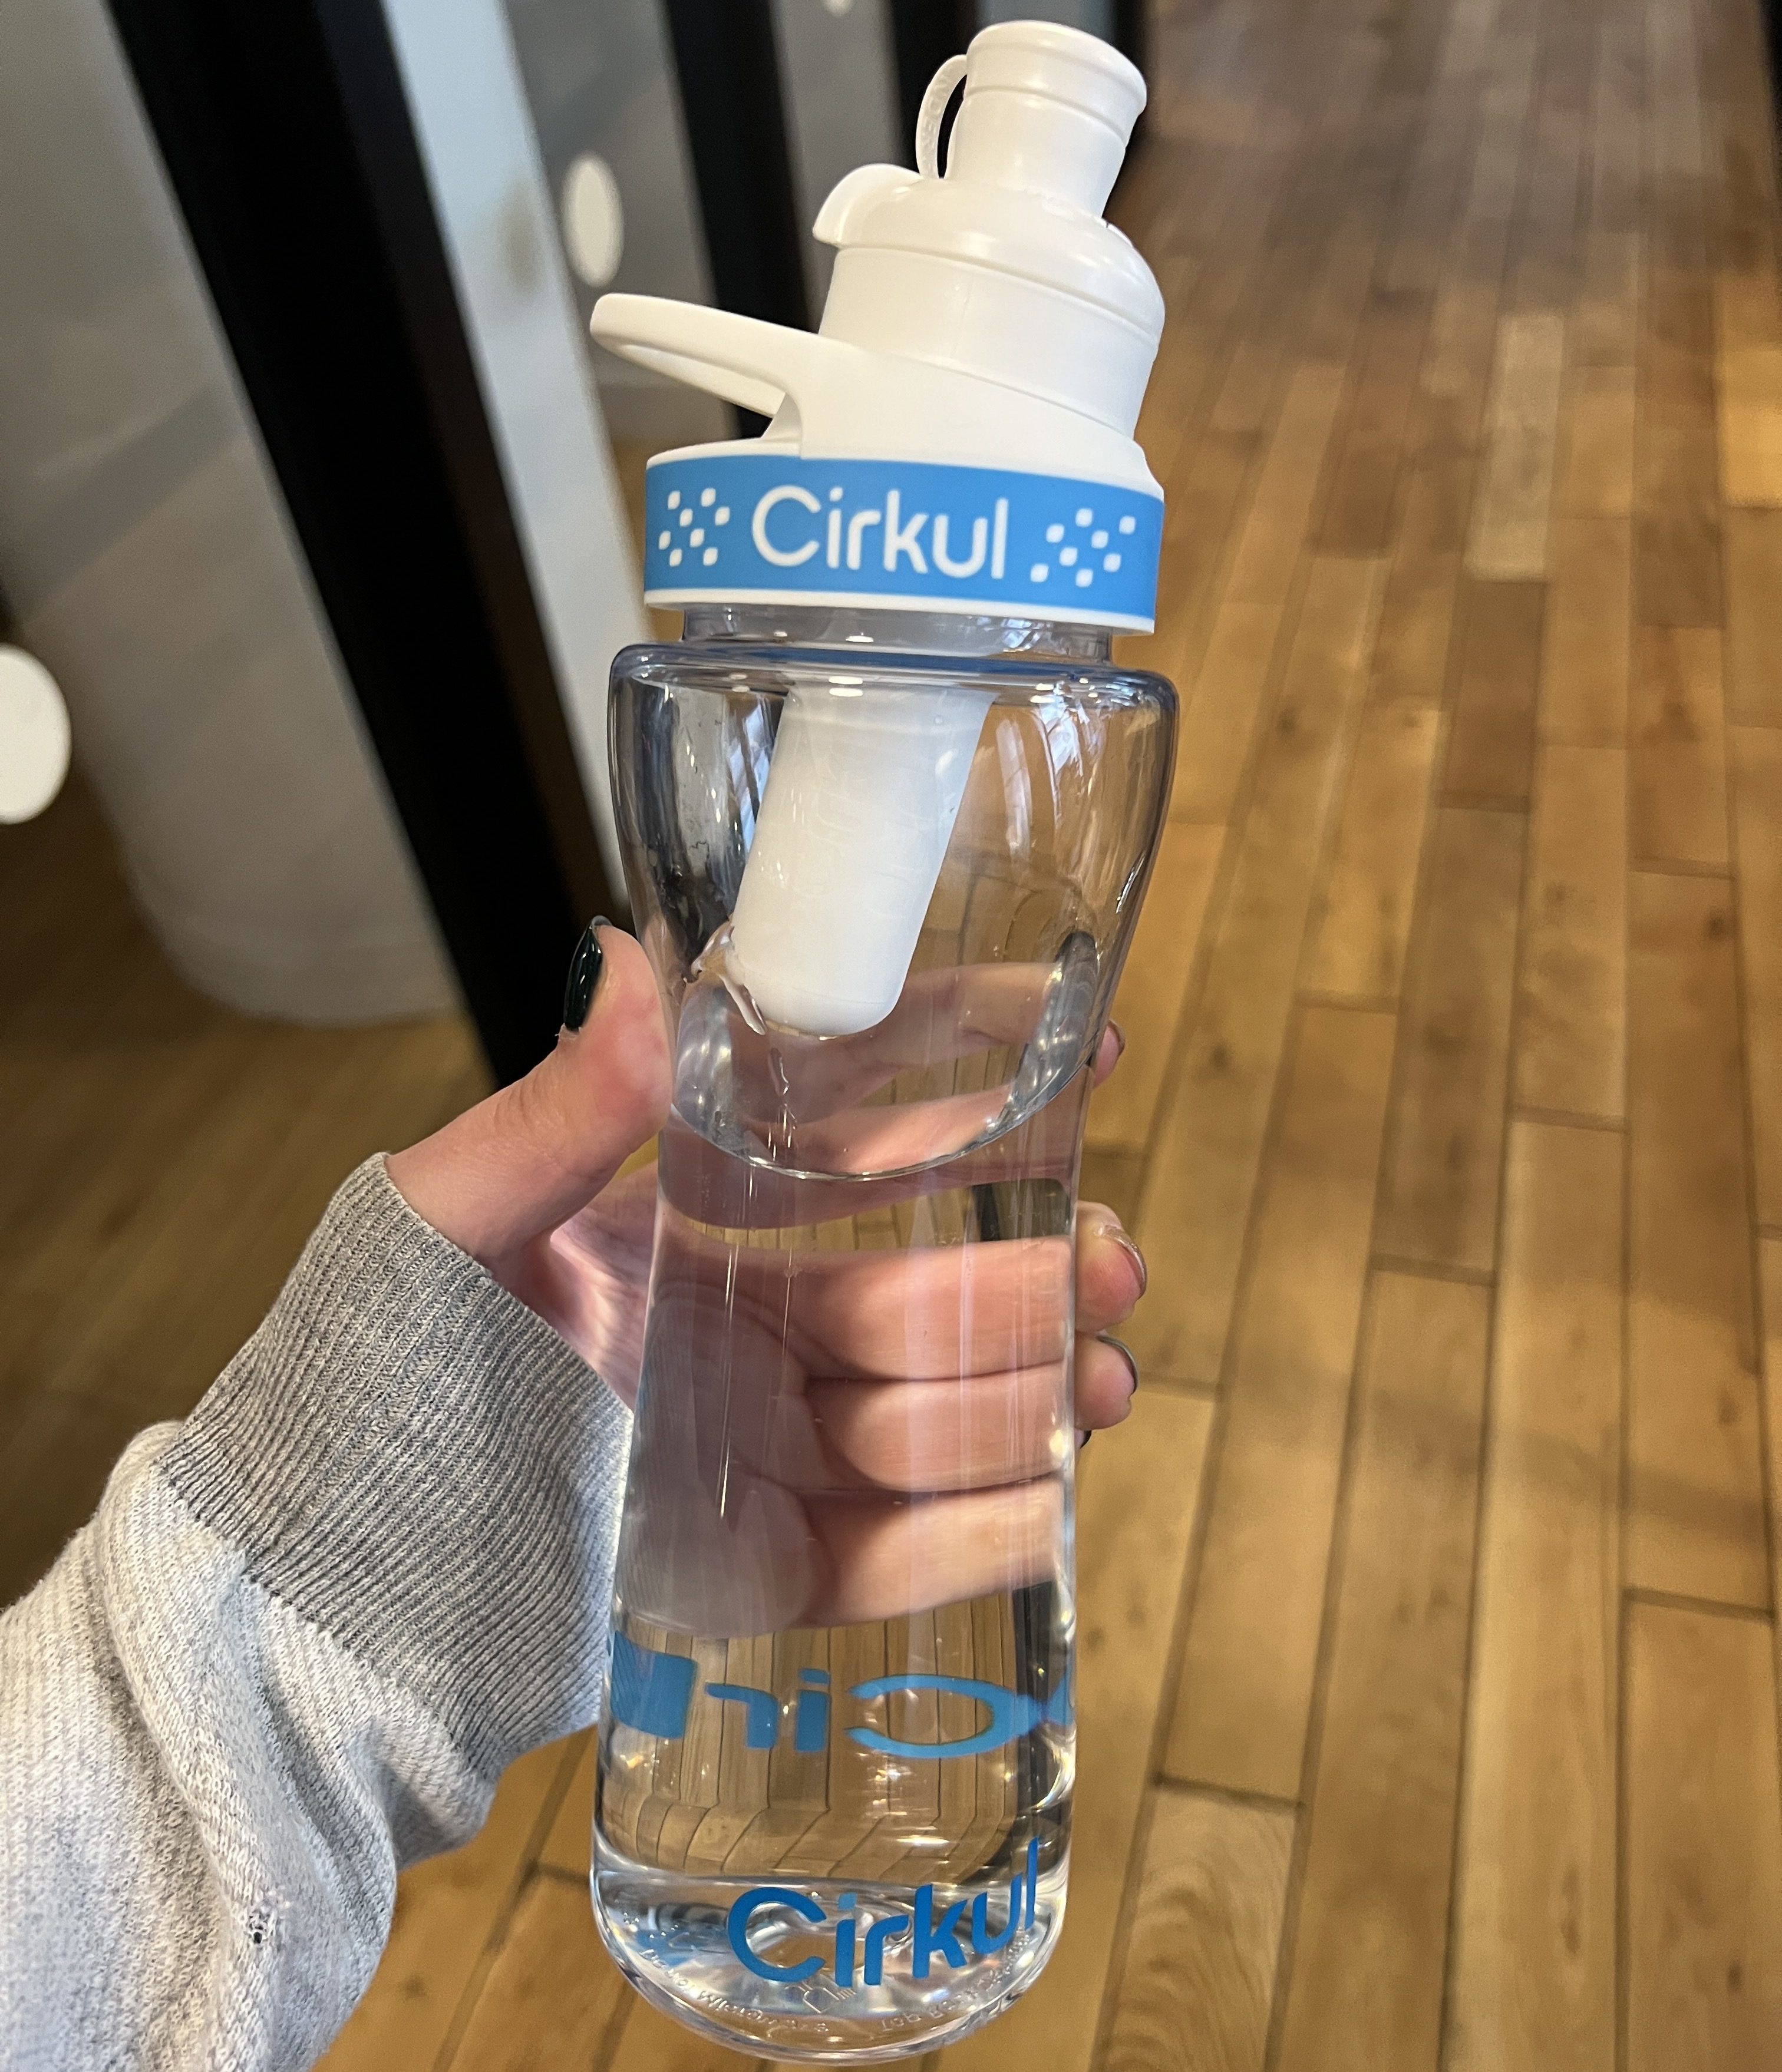 We LOVE our cirkul water bottle! It's also a hit with the kiddos